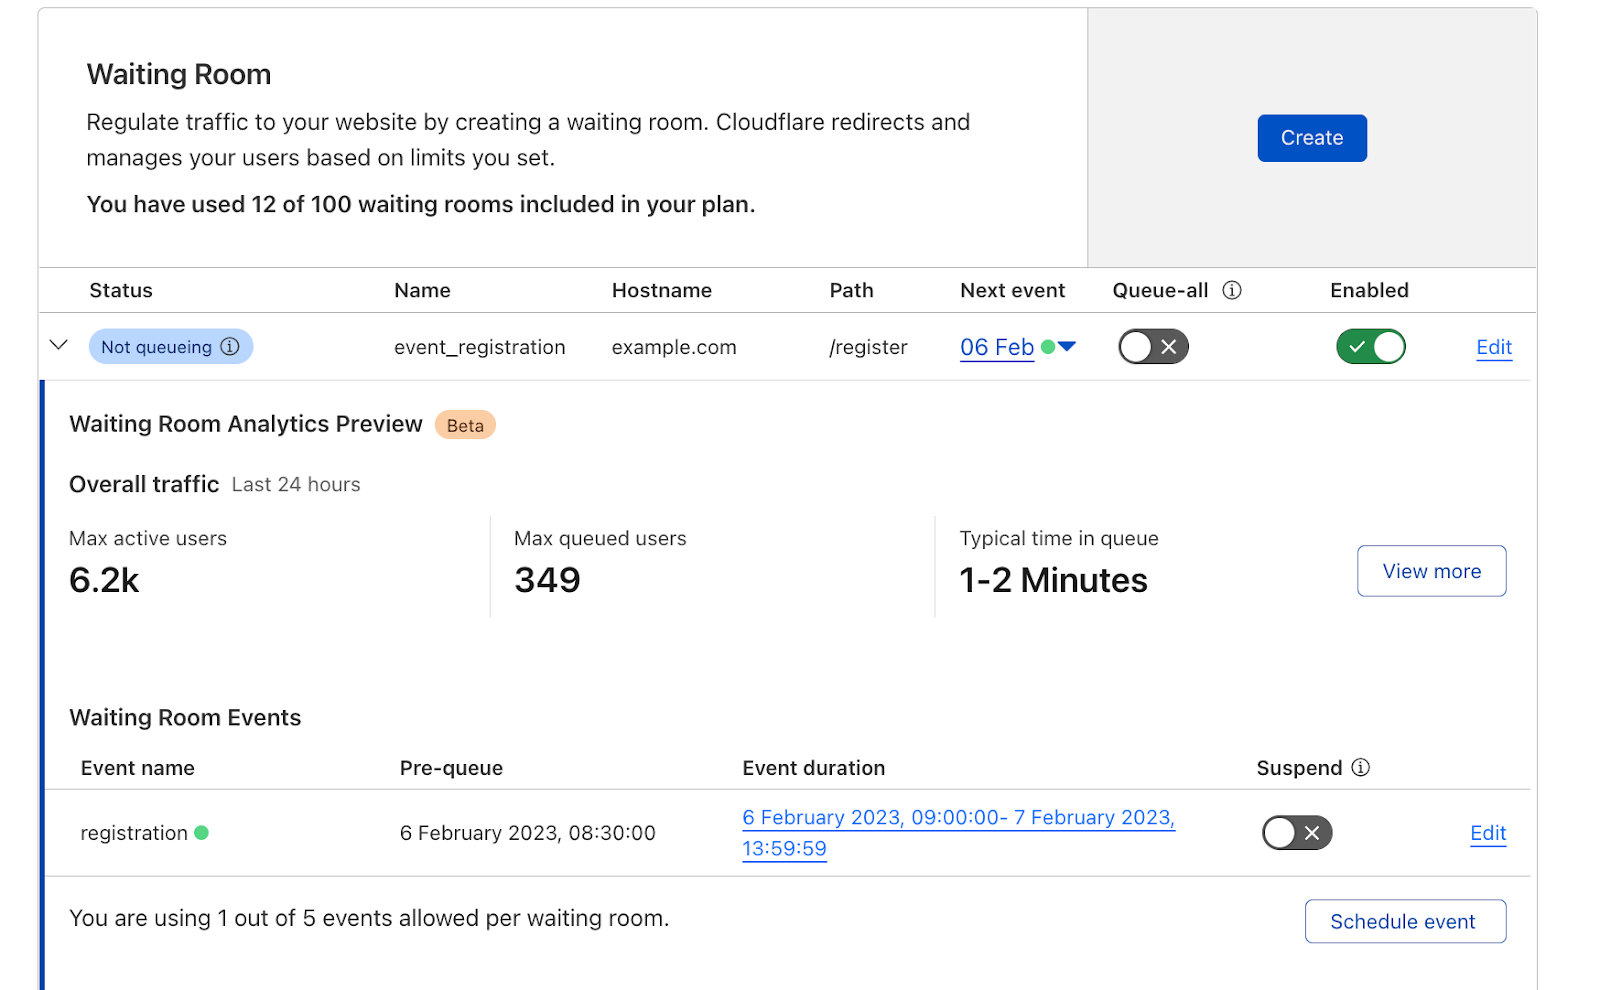 Get at-a-glance metrics of the last 24 hours of Waiting Room traffic.